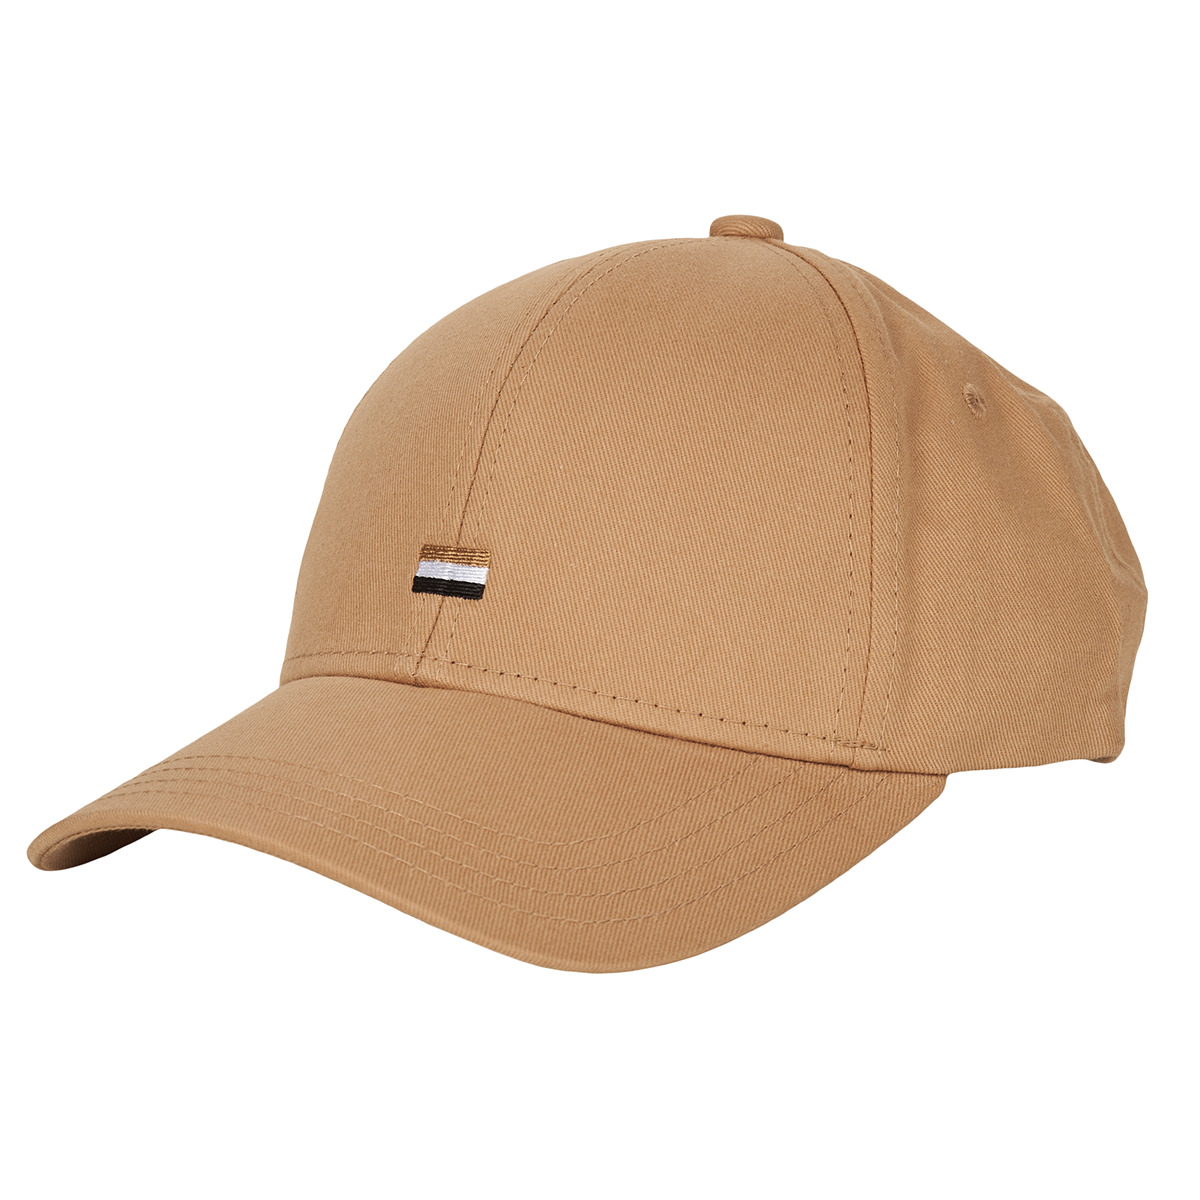 delivery Caps Men Europe 44,00 | Zed-FLAG Spartoo Fast Accessorie Camel ! - - BOSS €